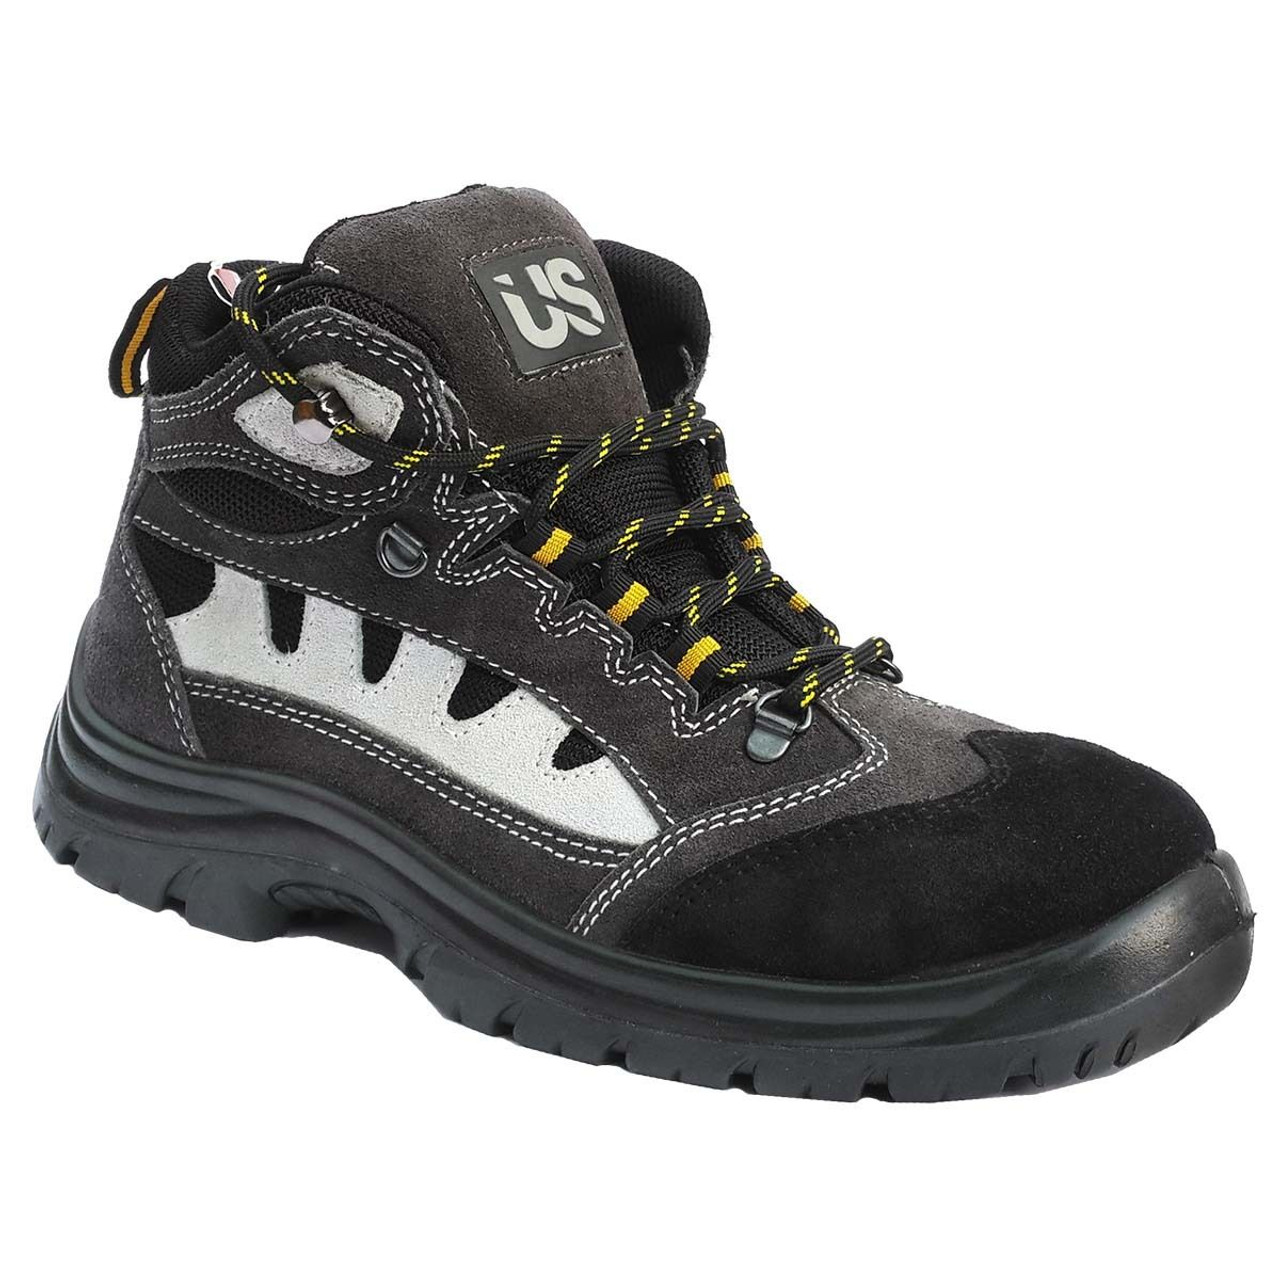 Workhorse Safety Boots